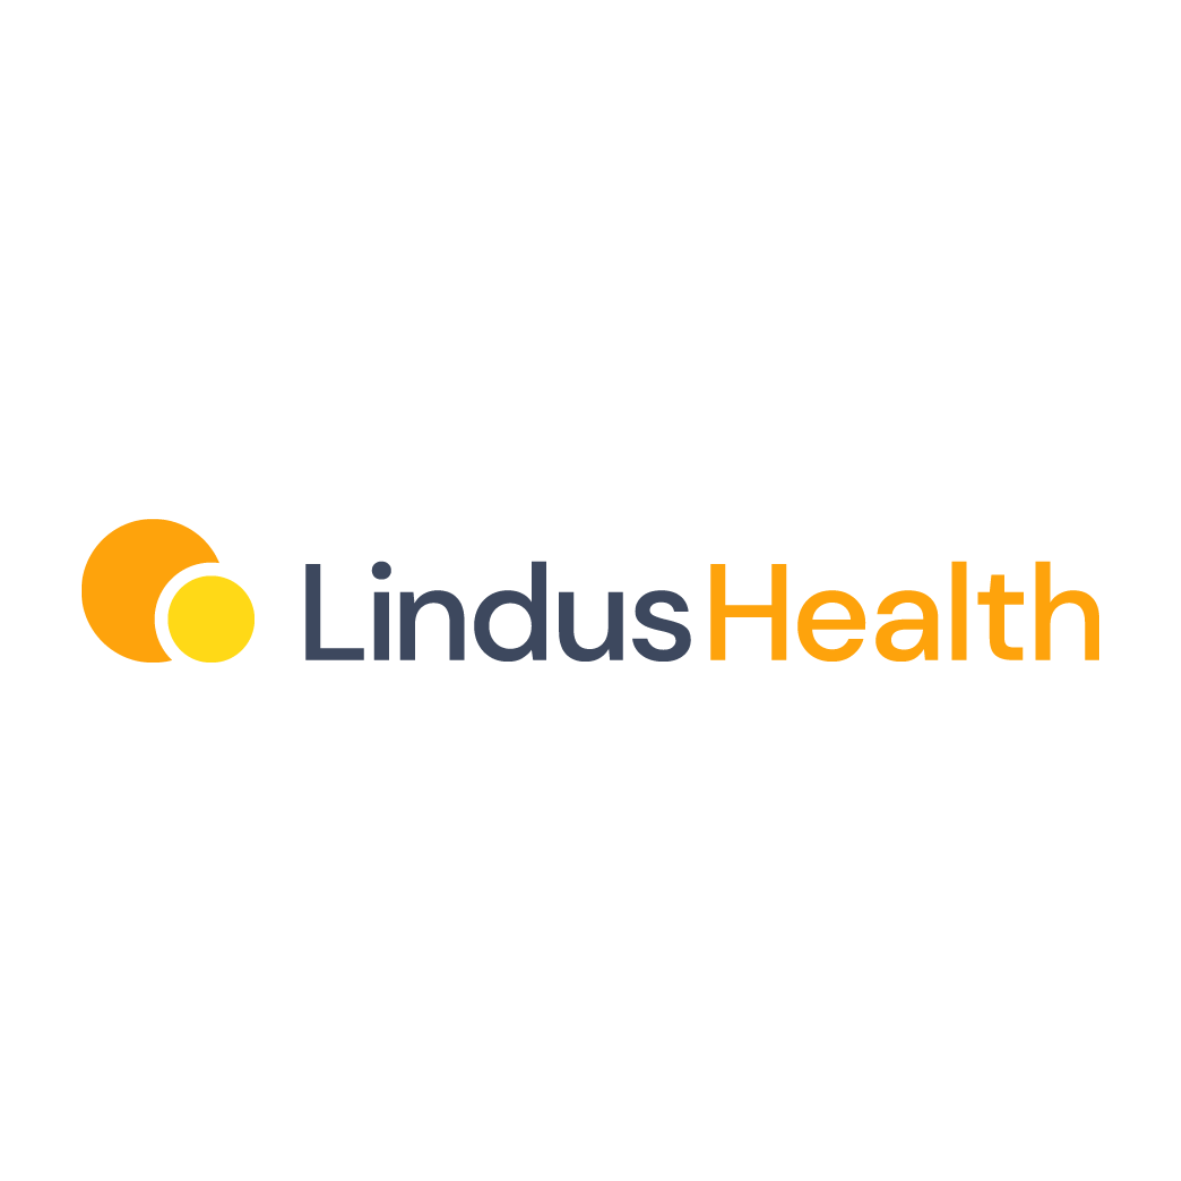 Lindus Health Raises $18M in Series A Funding, Attracting Prominent Backers